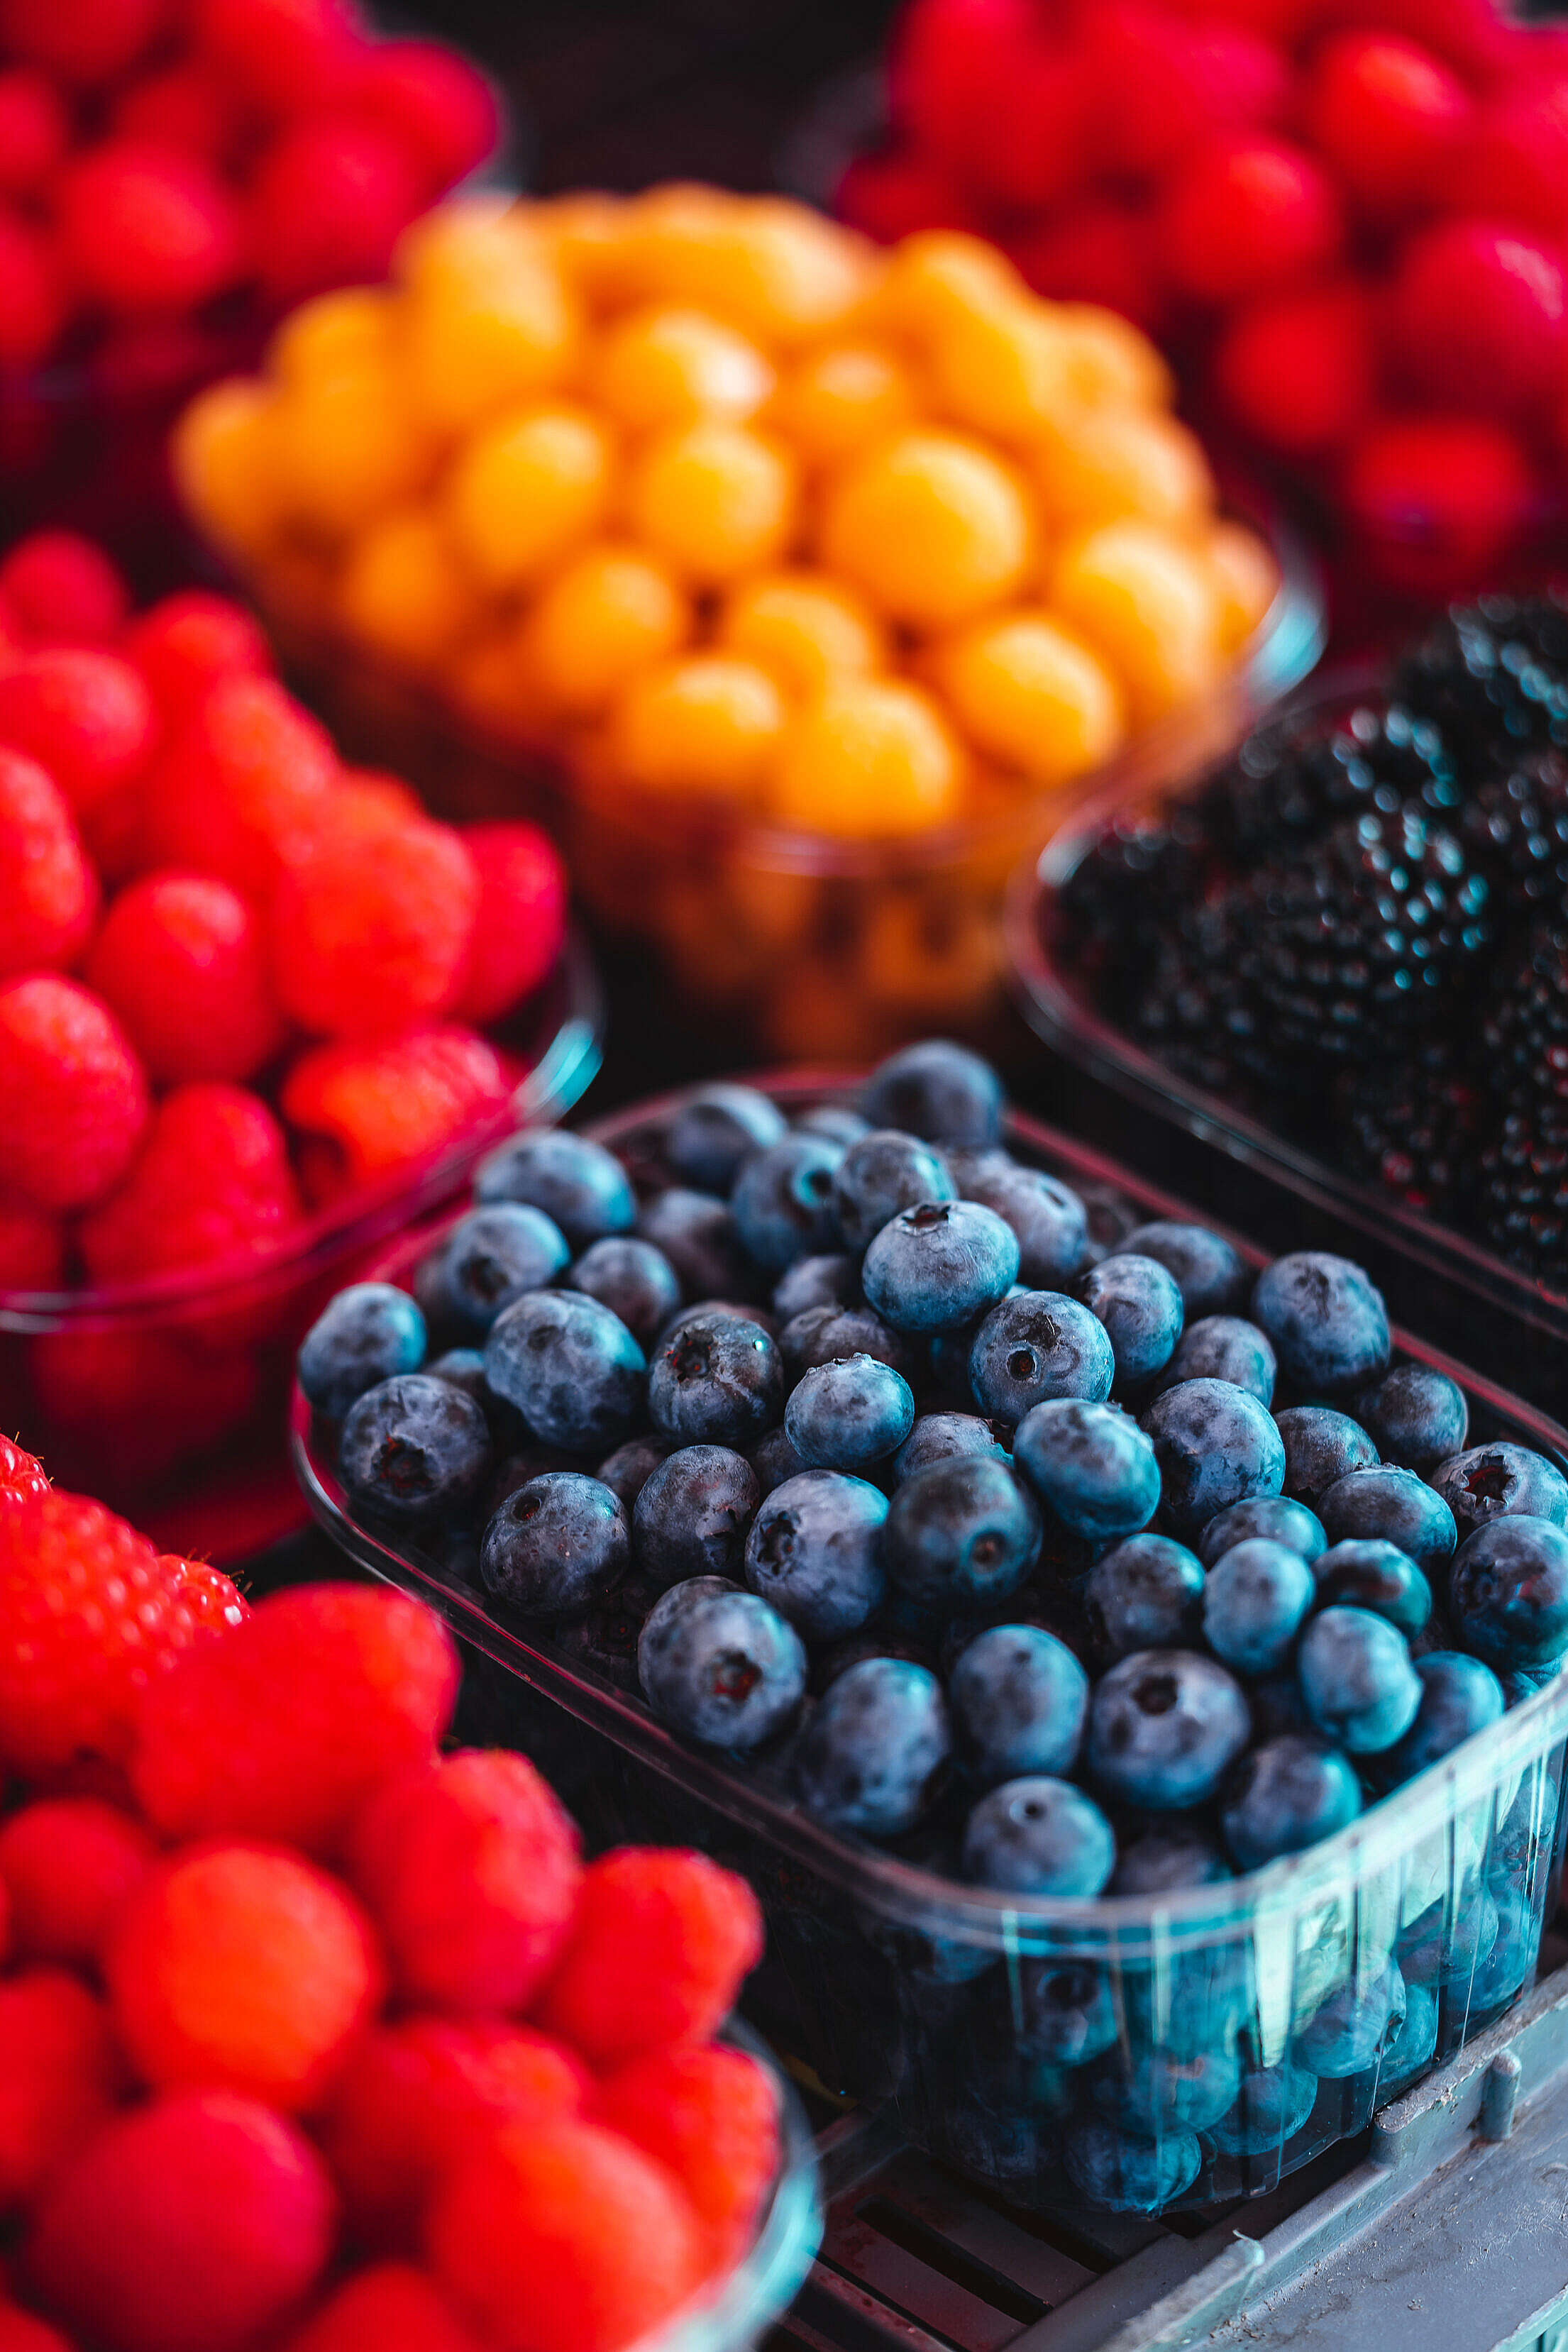 Fruits Vertical Free Stock Photo